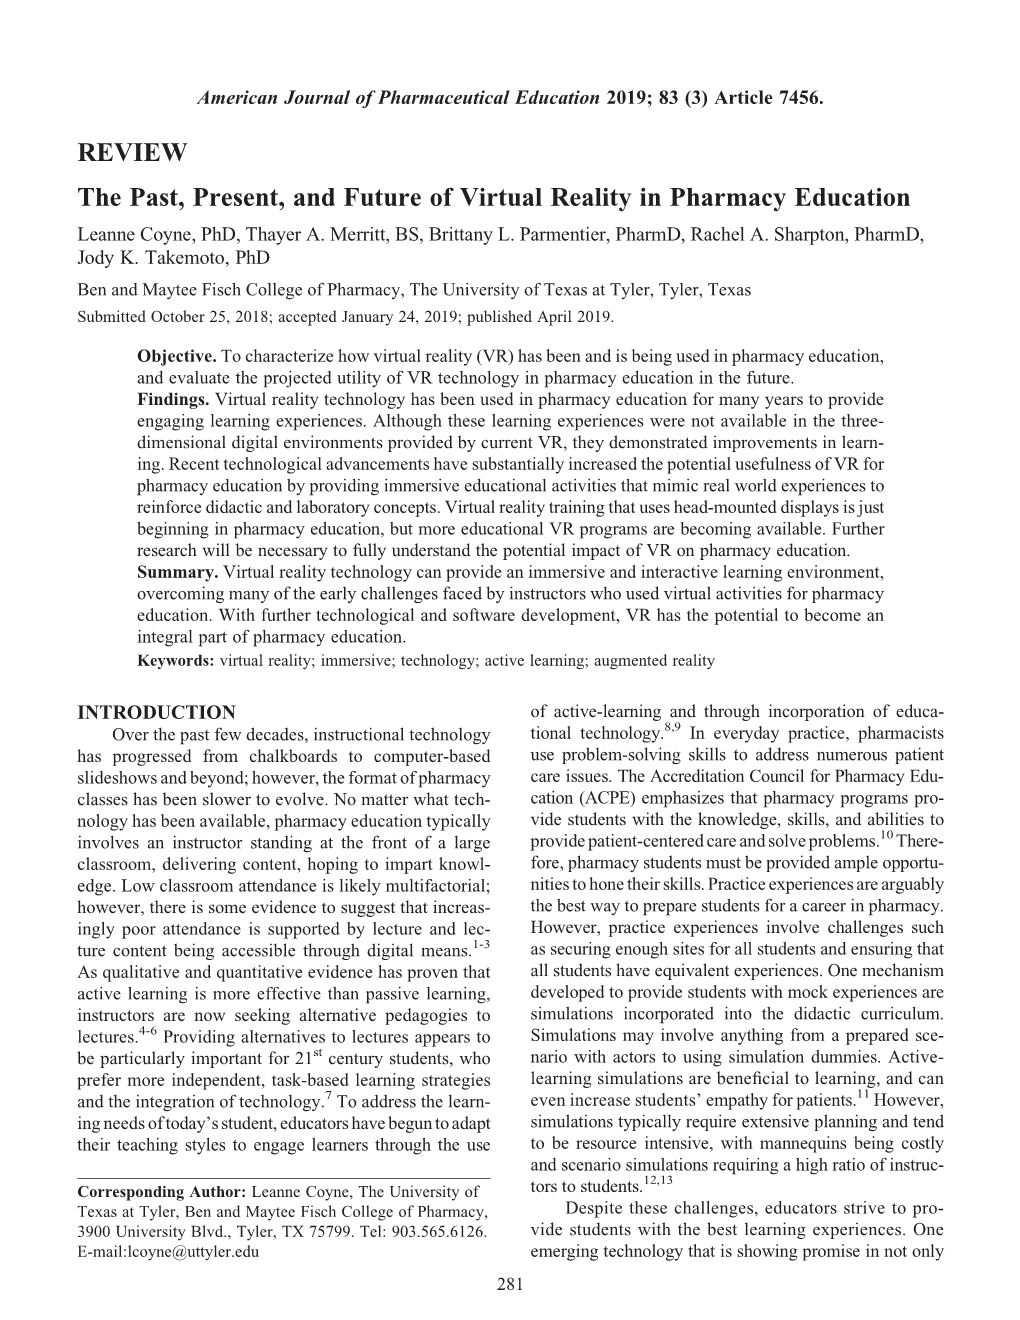 REVIEW the Past, Present, and Future of Virtual Reality in Pharmacy Education Leanne Coyne, Phd, Thayer A